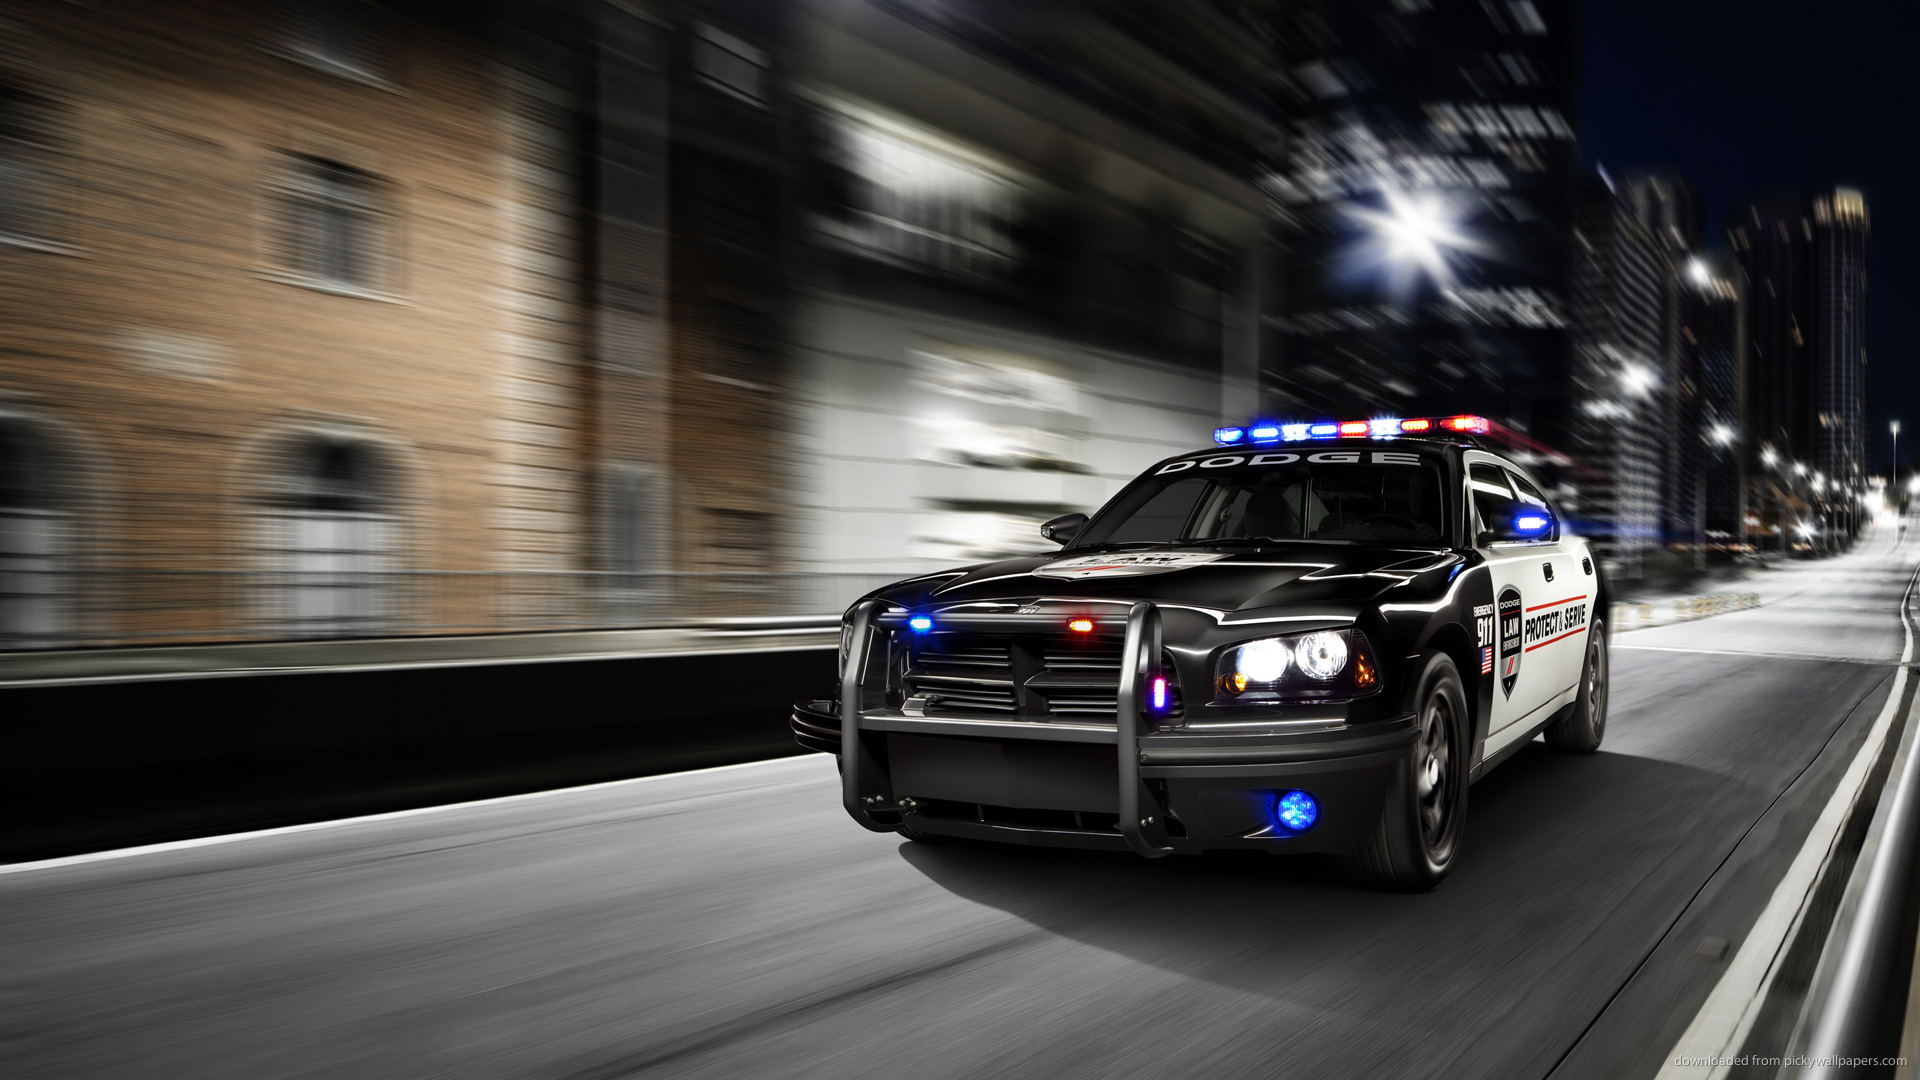 Cool Police Cars Wallpaper On